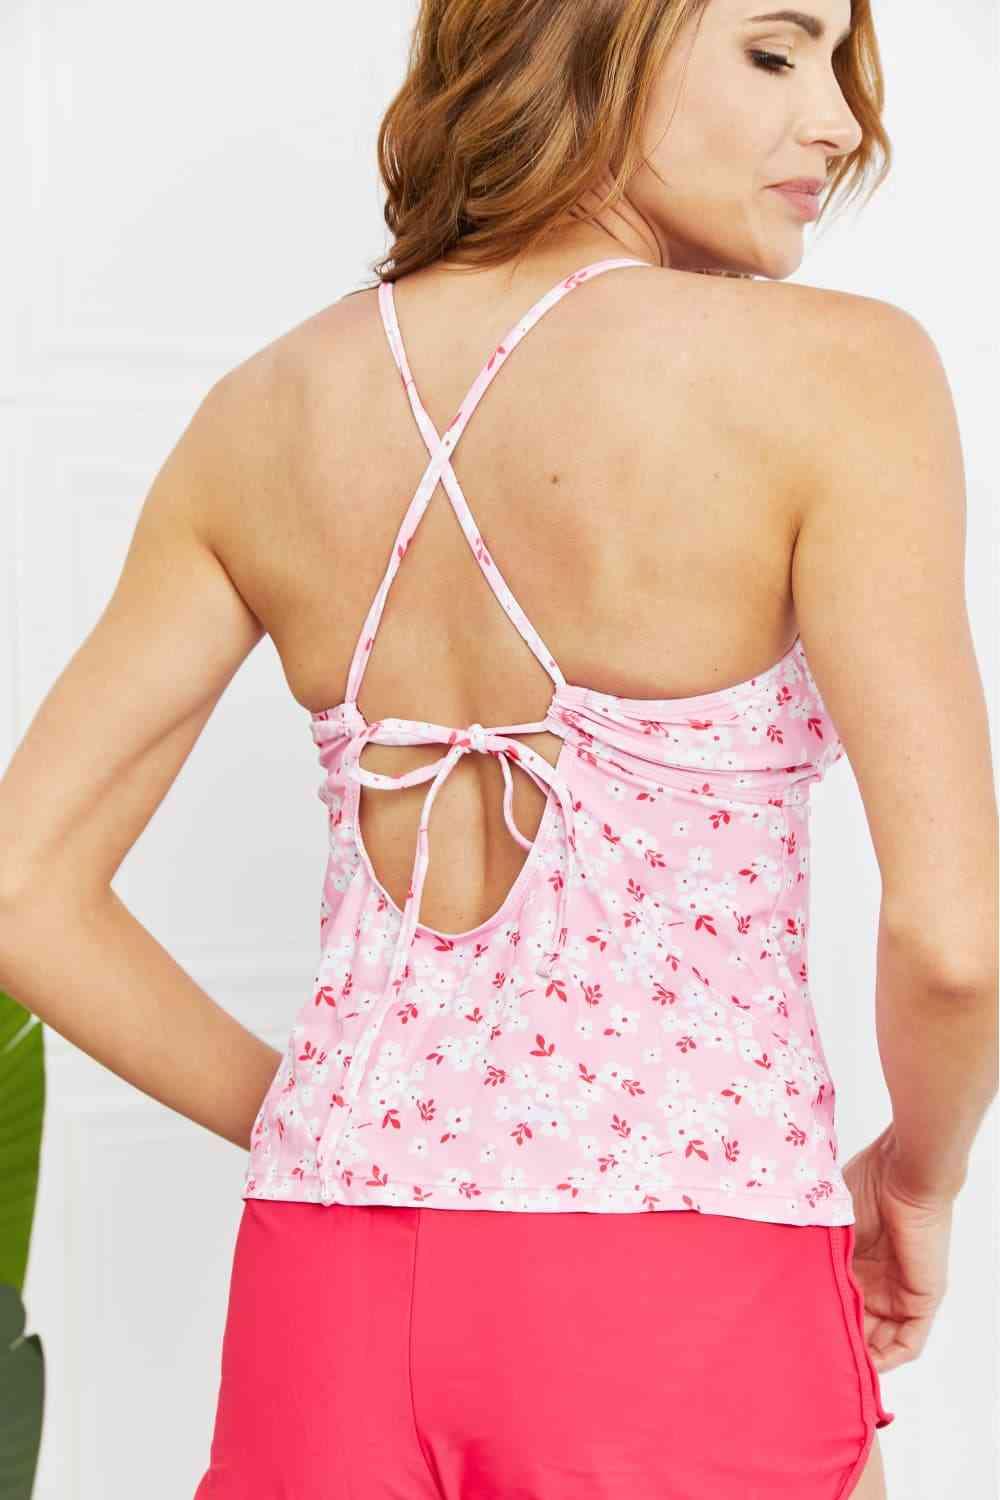 Marina West Swim By The Shore Full Size Two-Piece Swimsuit in Blossom Pink - Immenzive